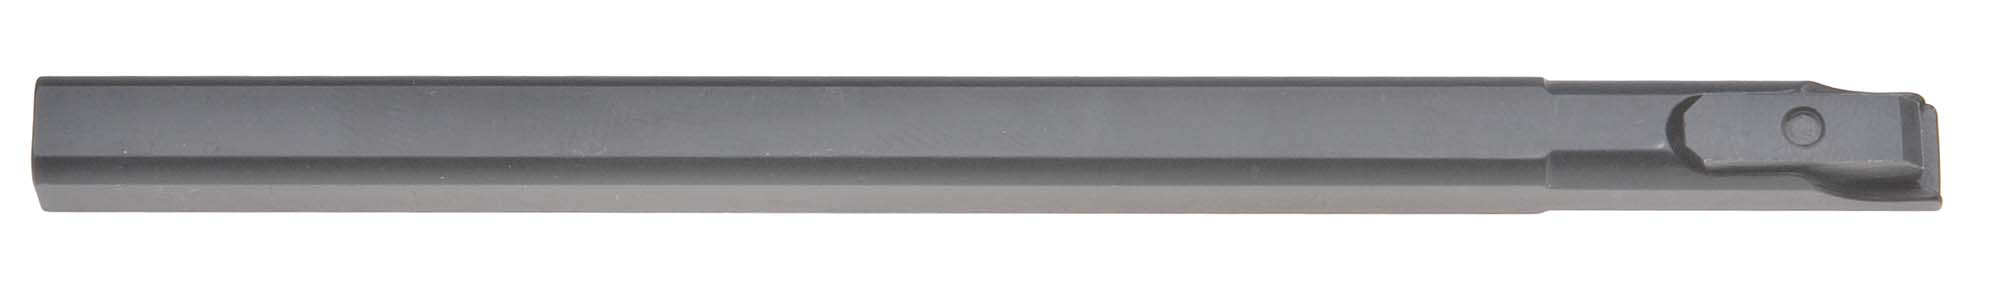 1" Mecabore Style Boring Bar